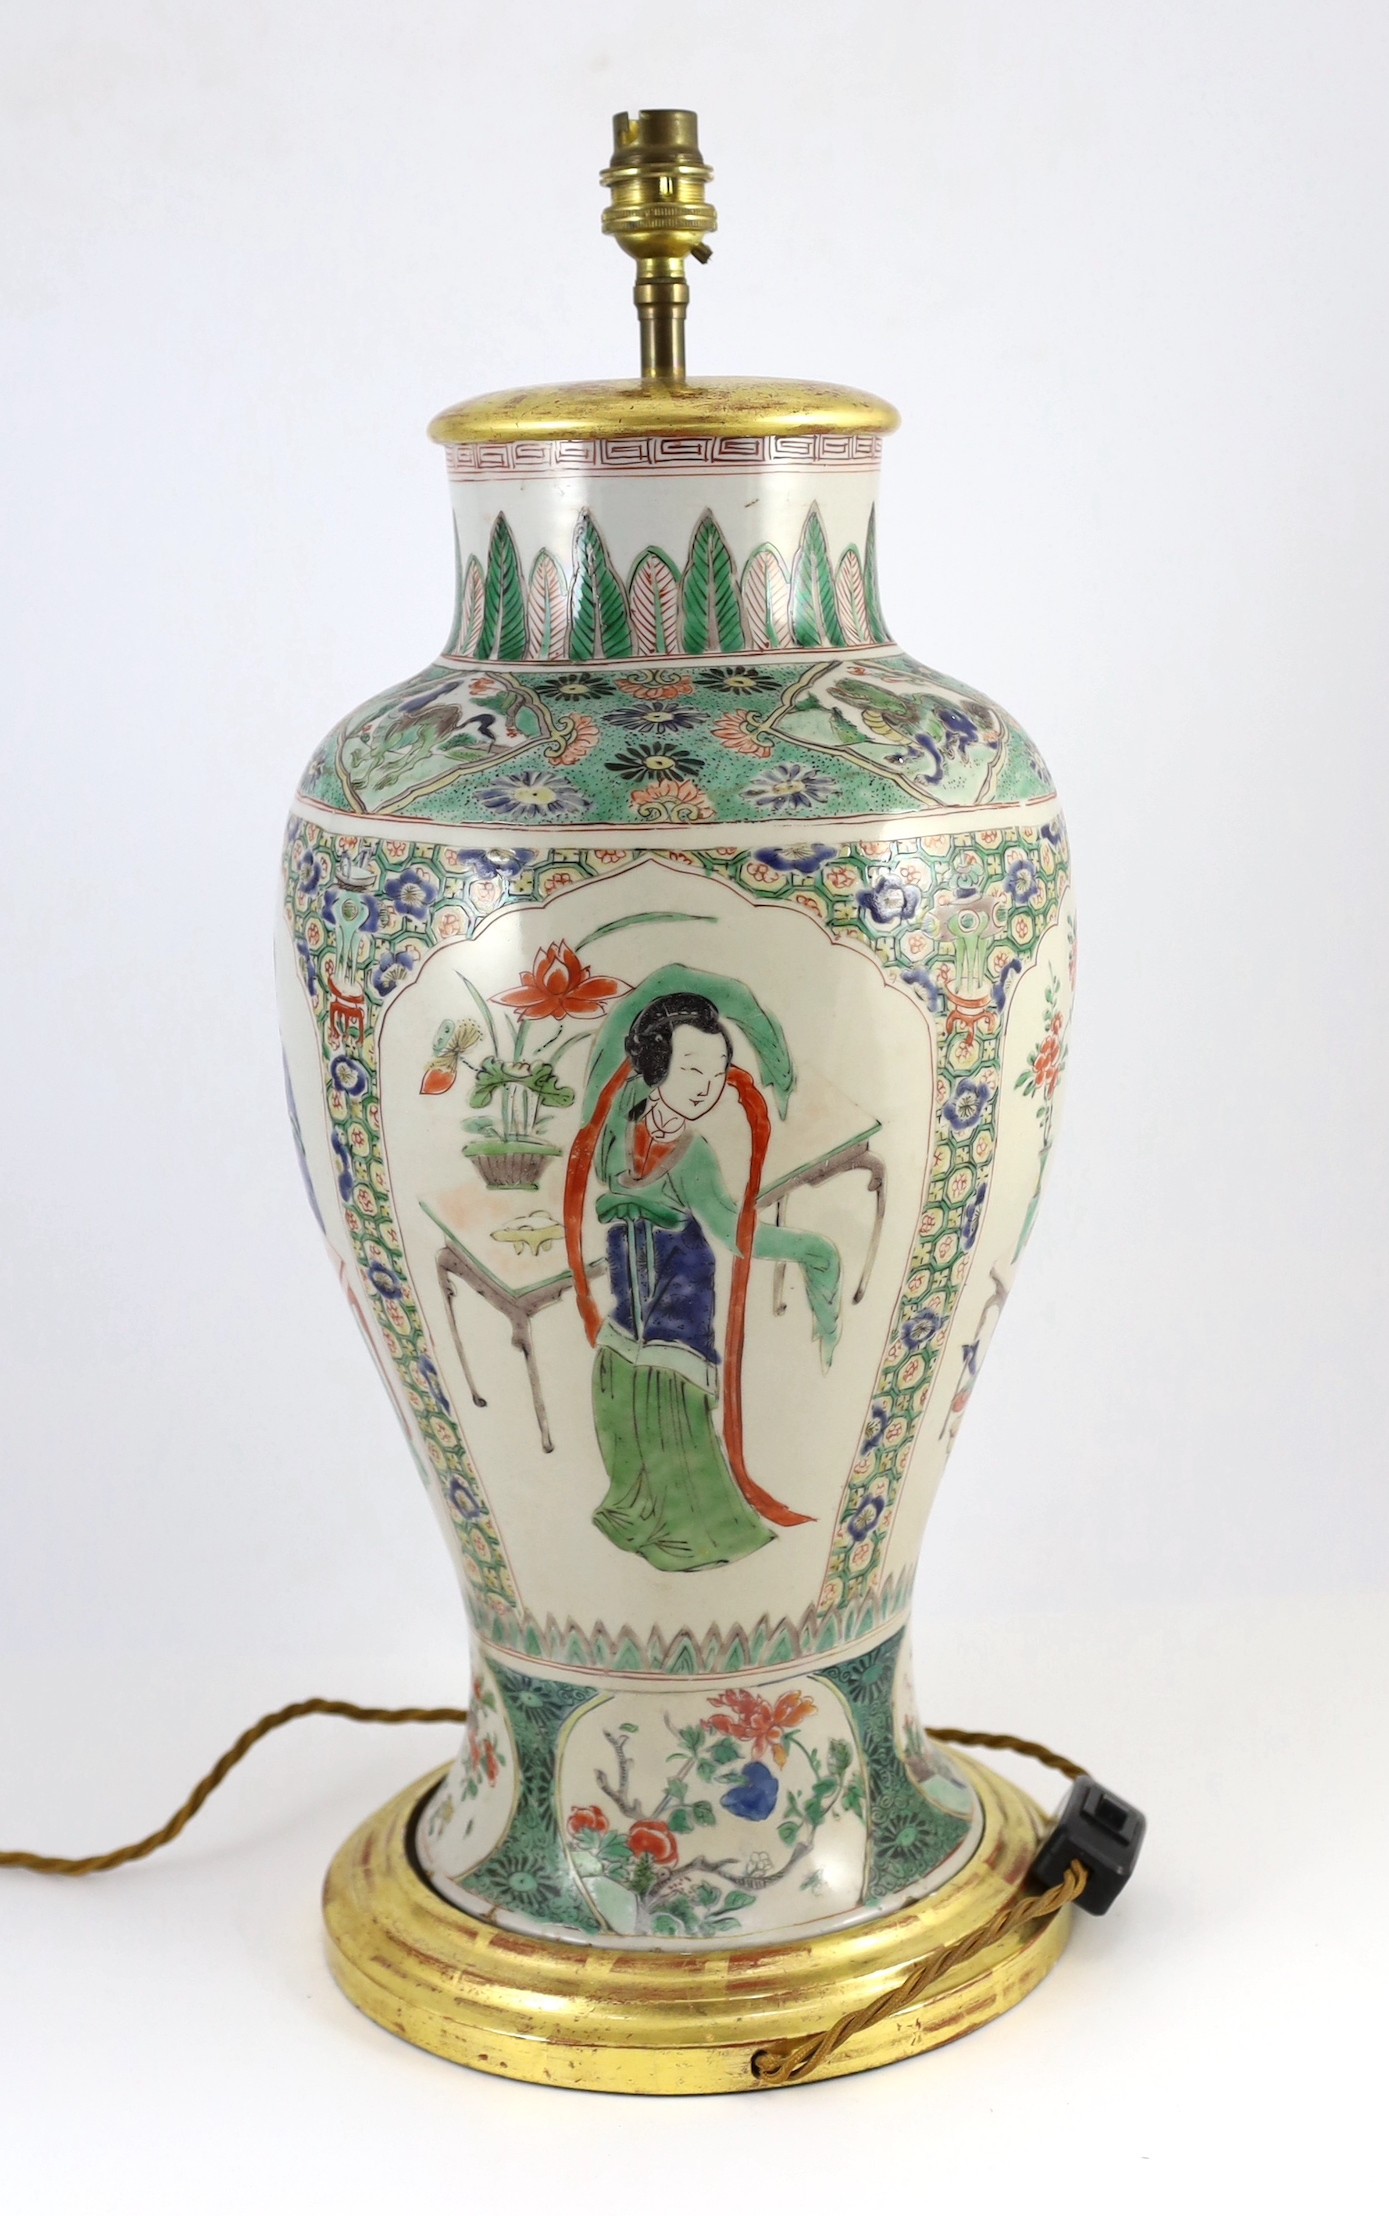 A Chinese famille verte baluster ‘Four Beauties’ baluster vase, Kangxi period, vase 42cm high, lower third restored, base lacking and mounted as a lamp, total height 53cm